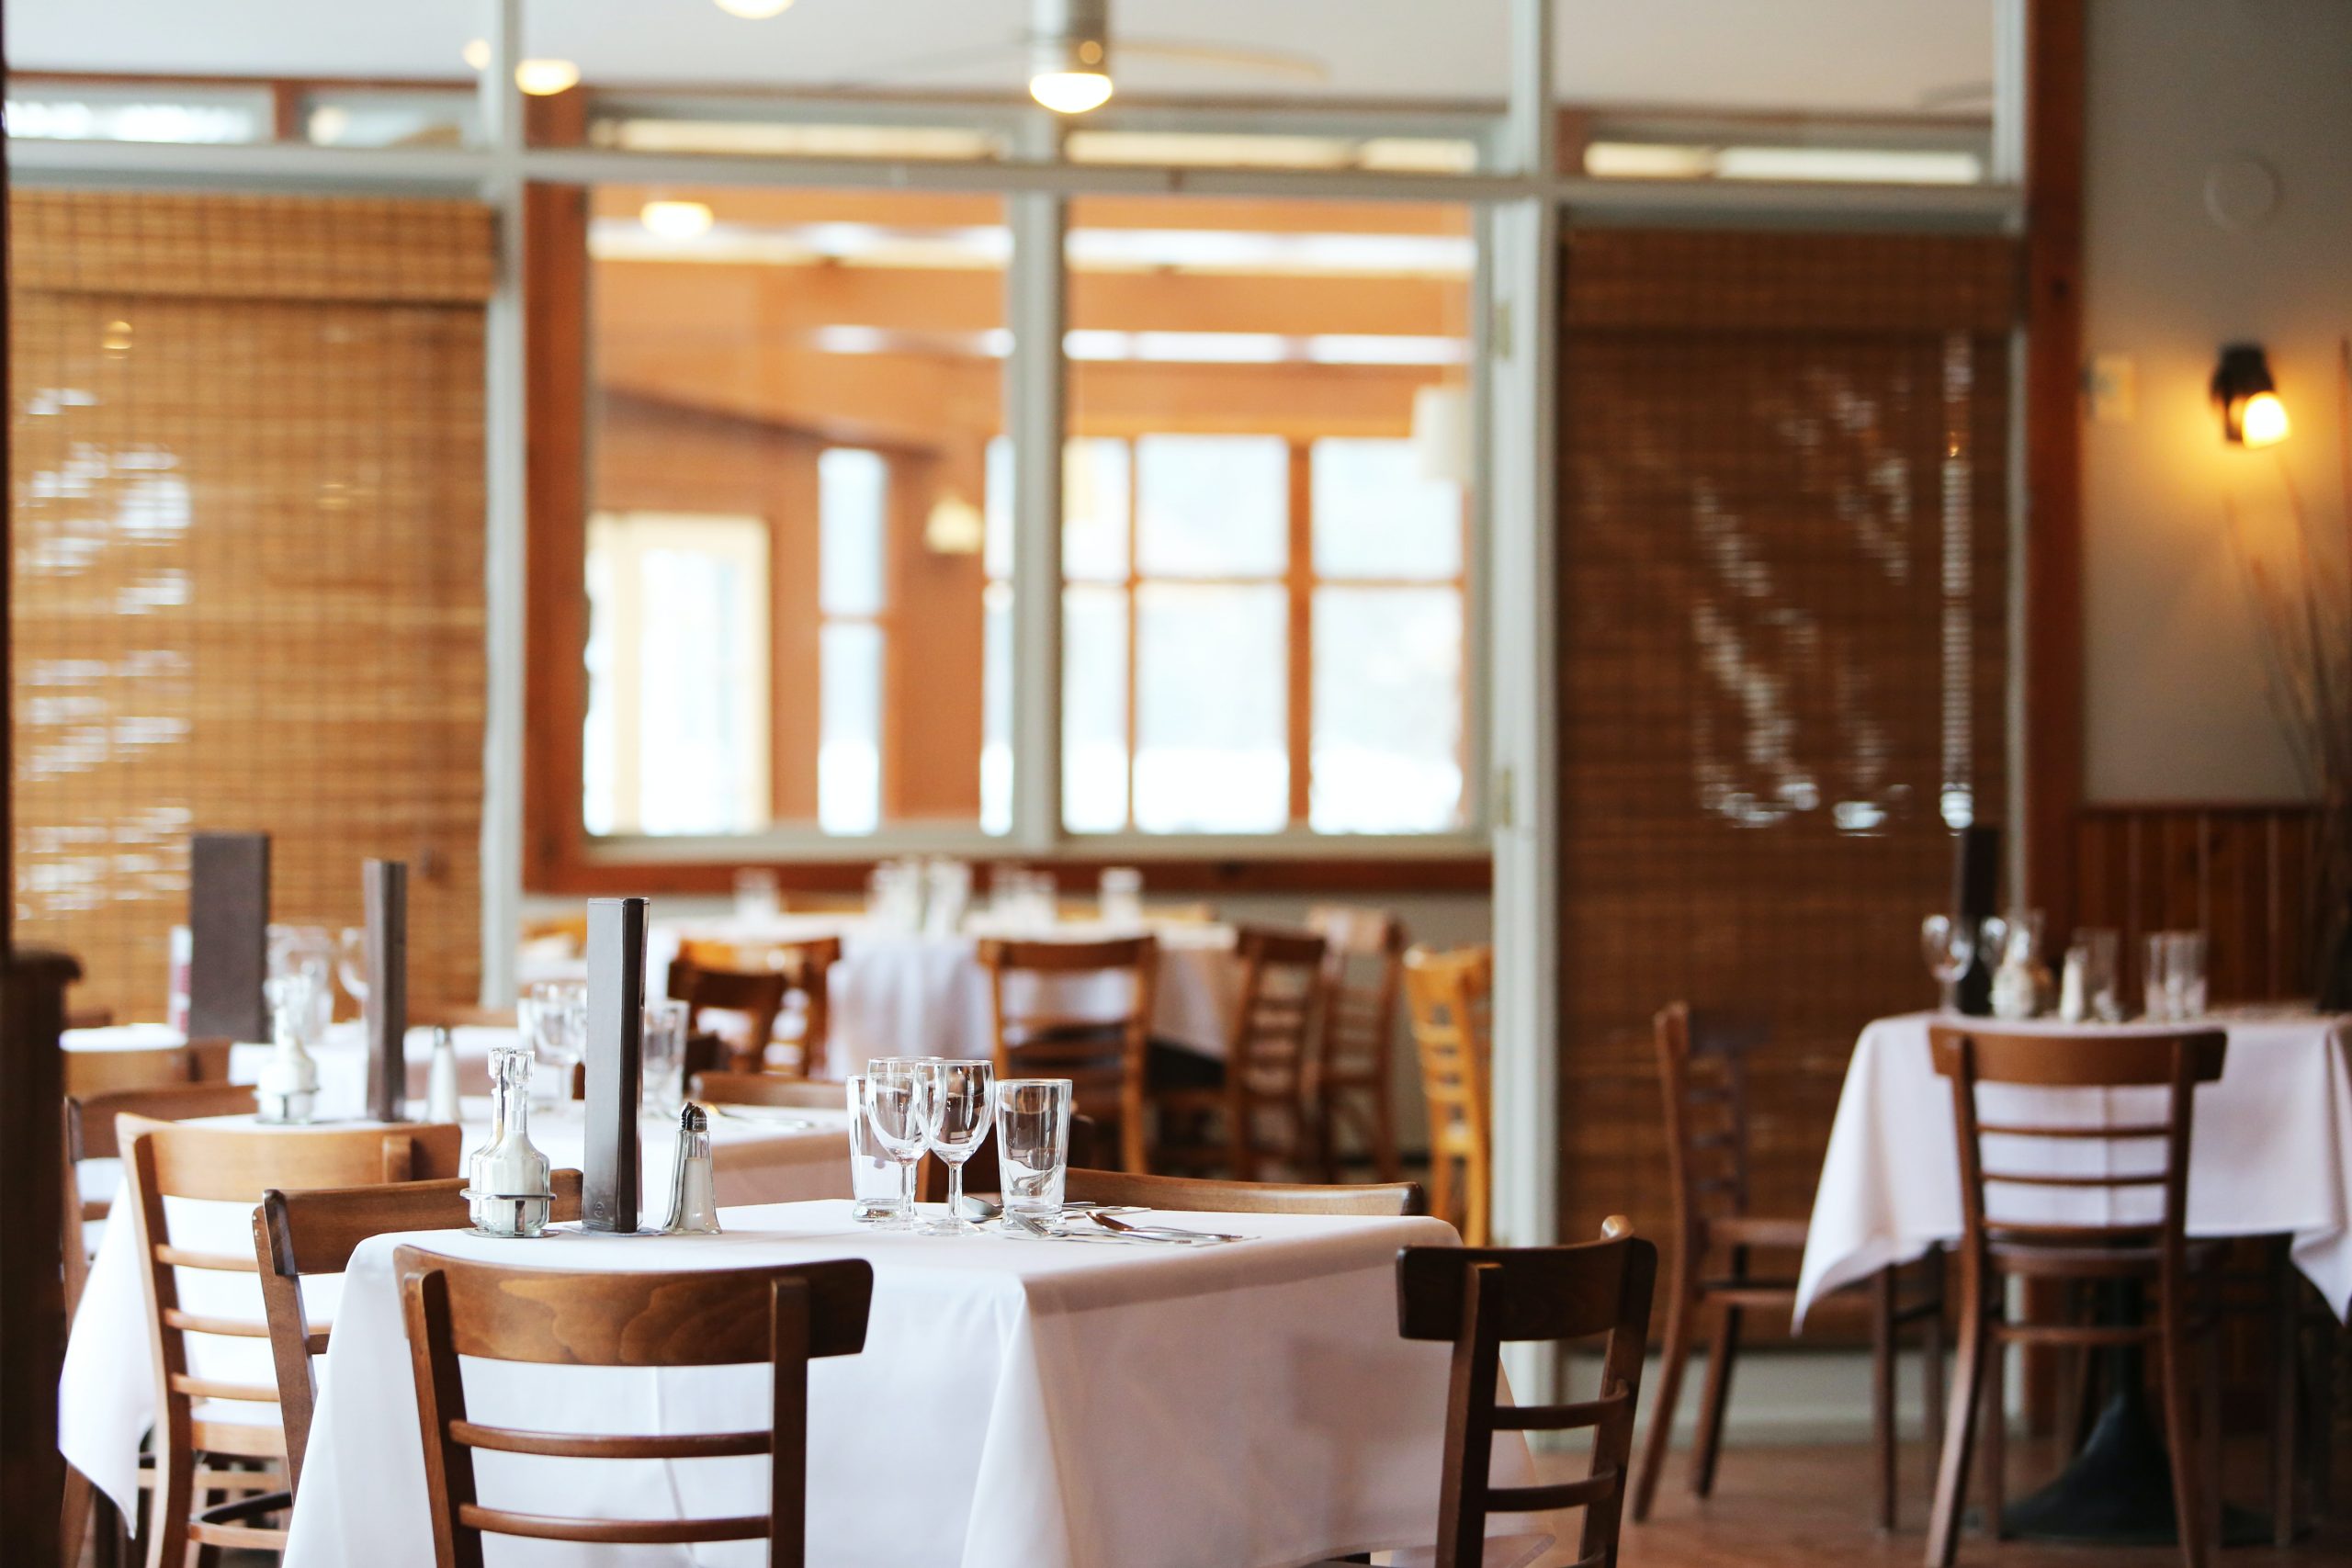 Restaurant Accounting Services in Falls Church